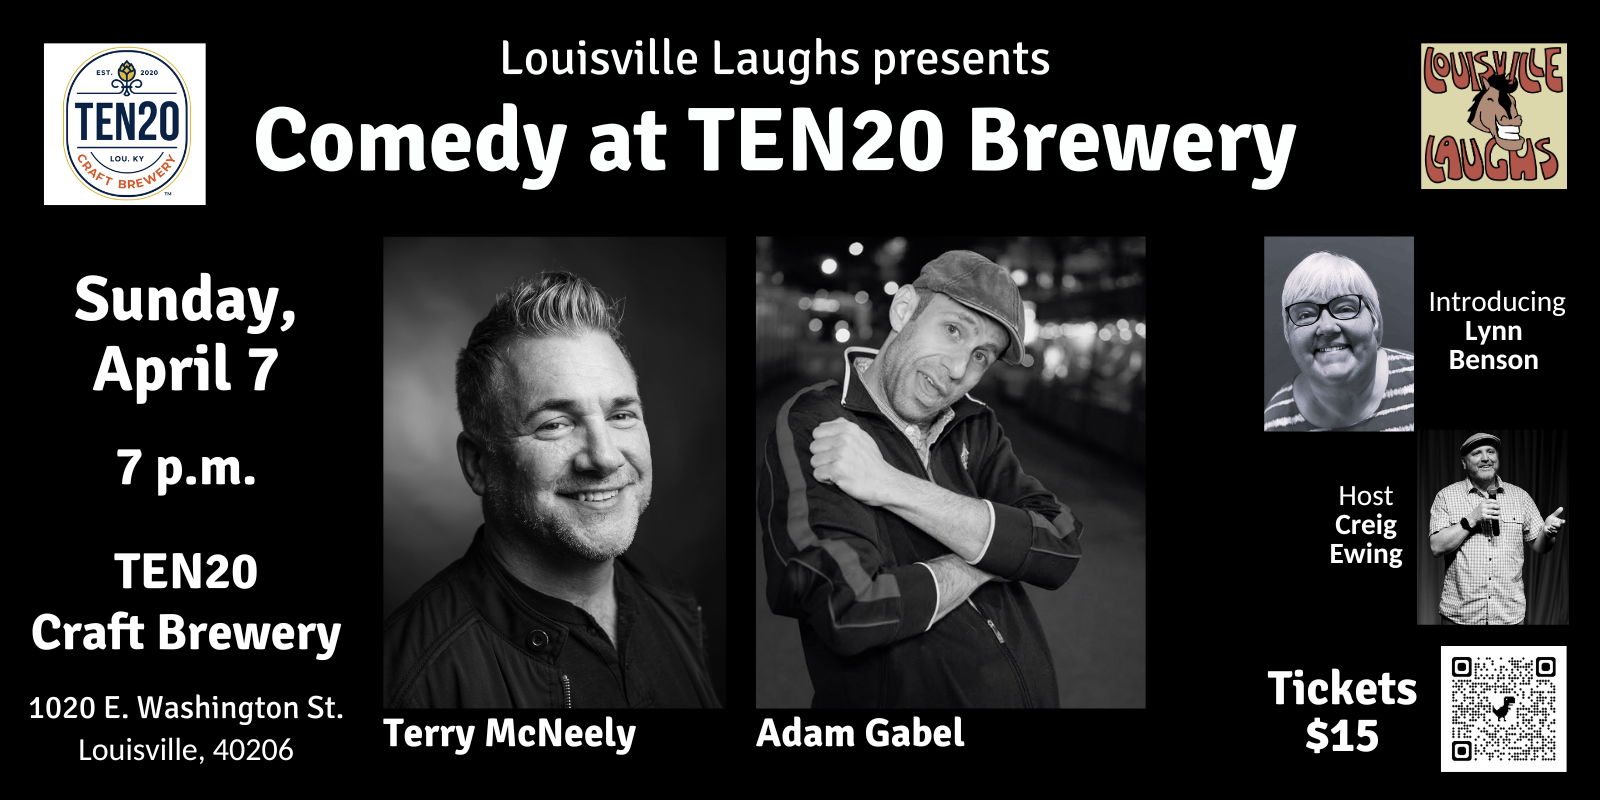 April 7 Comedy at TEN20 Brewery promotional image